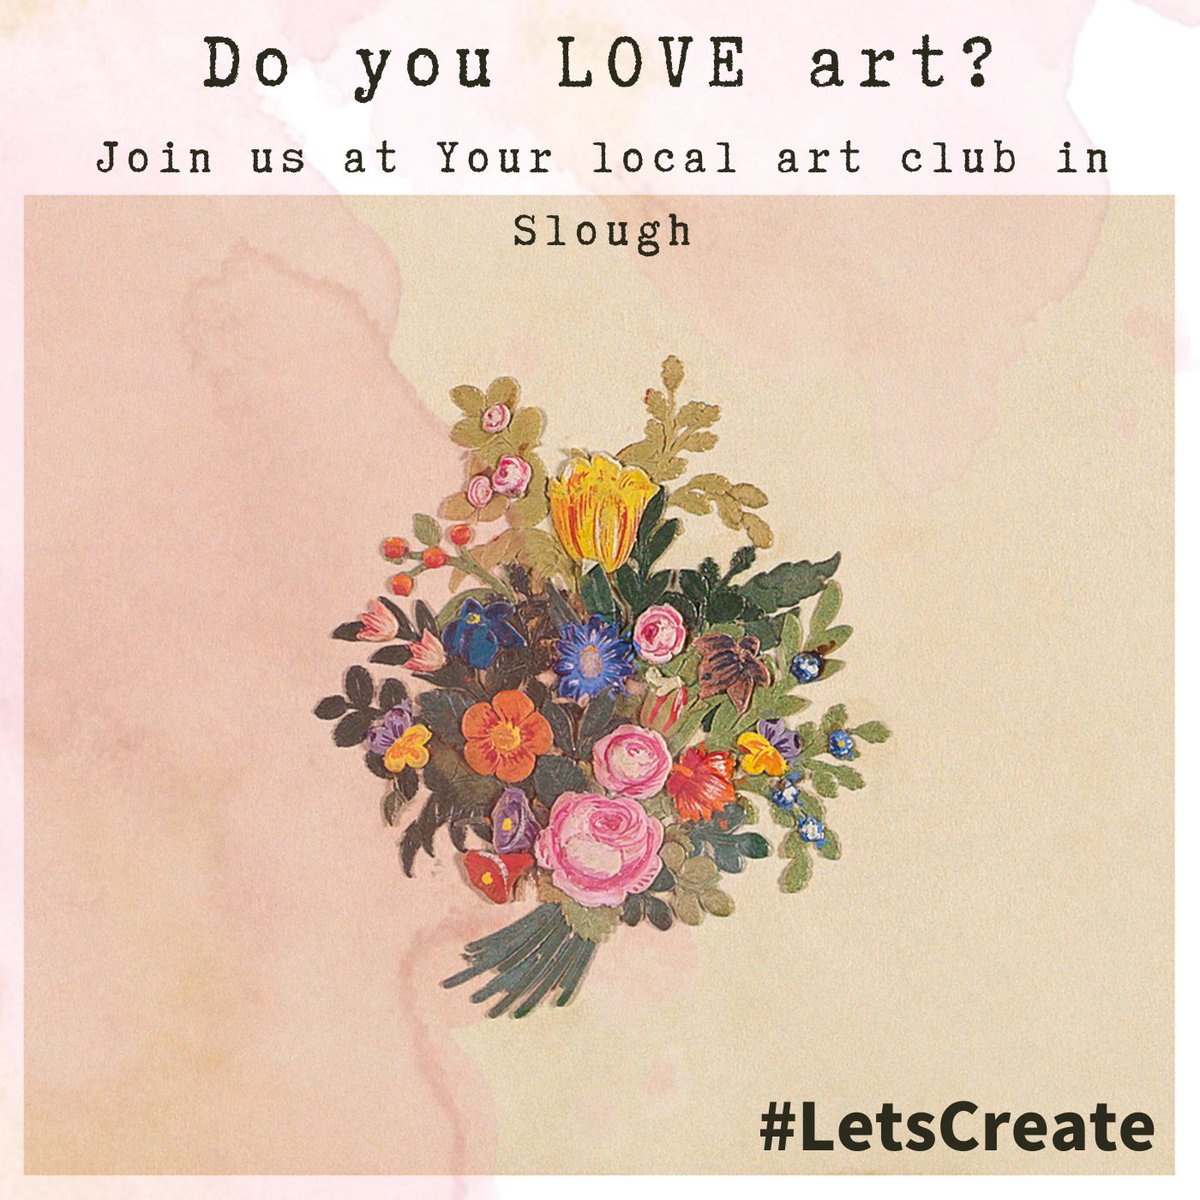 🎨 Do you Love art? Join us at your local art club in Slough! Whether you're a beginner or a professional enthusiast, our club welcomes you. Meet fellow artists, attend workshops, and get creative. 

#ArtClub #Slough #GetCreative #LetsCreate